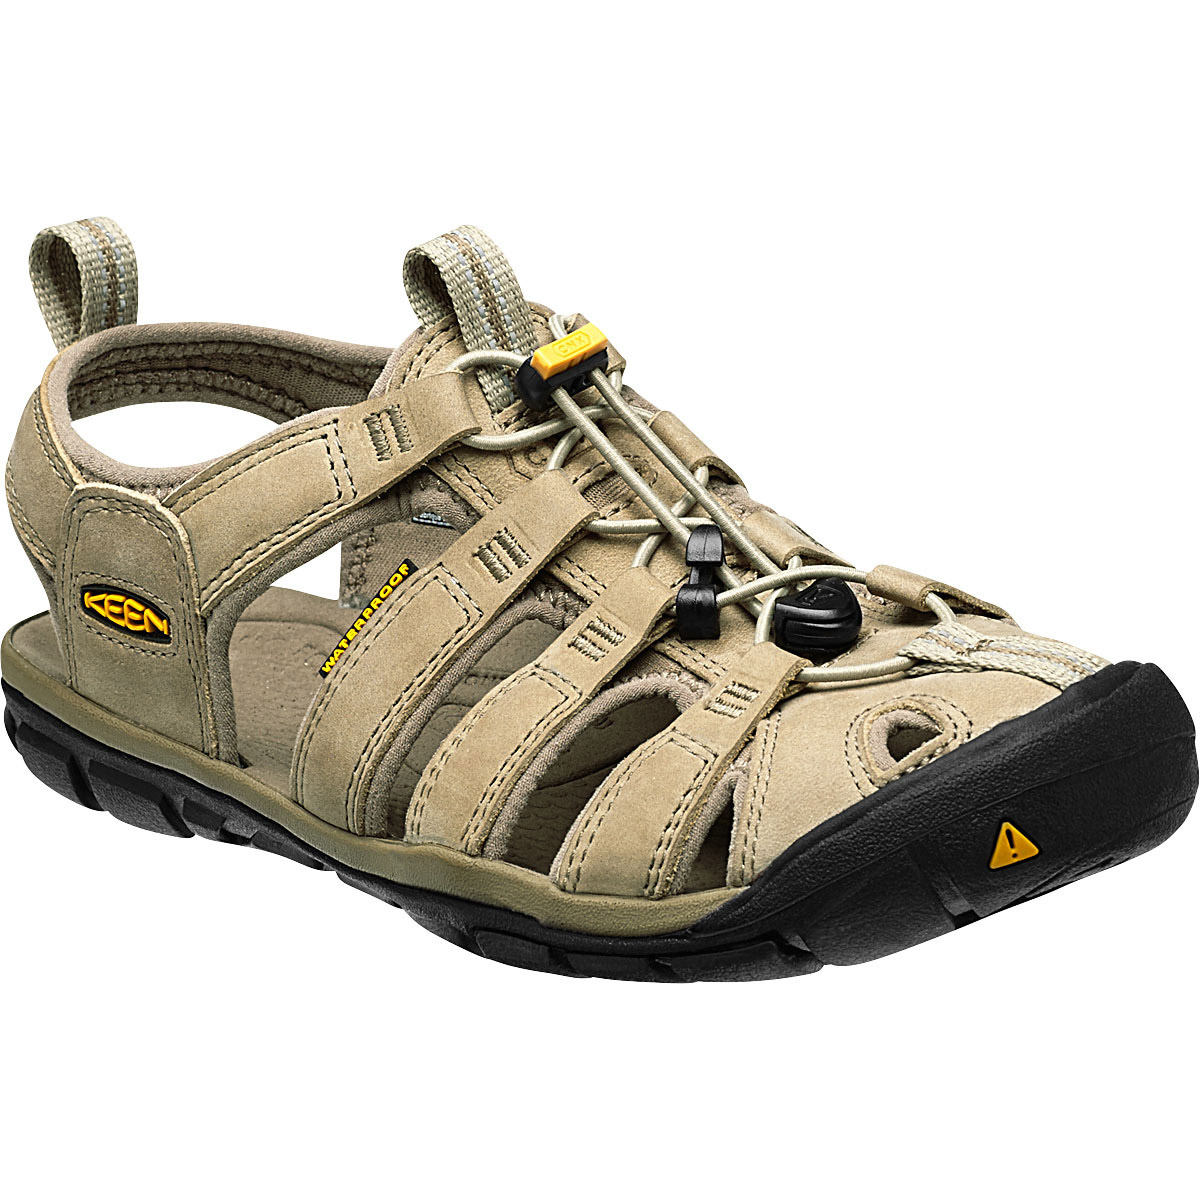 keen women's clearwater cnx leather sandal